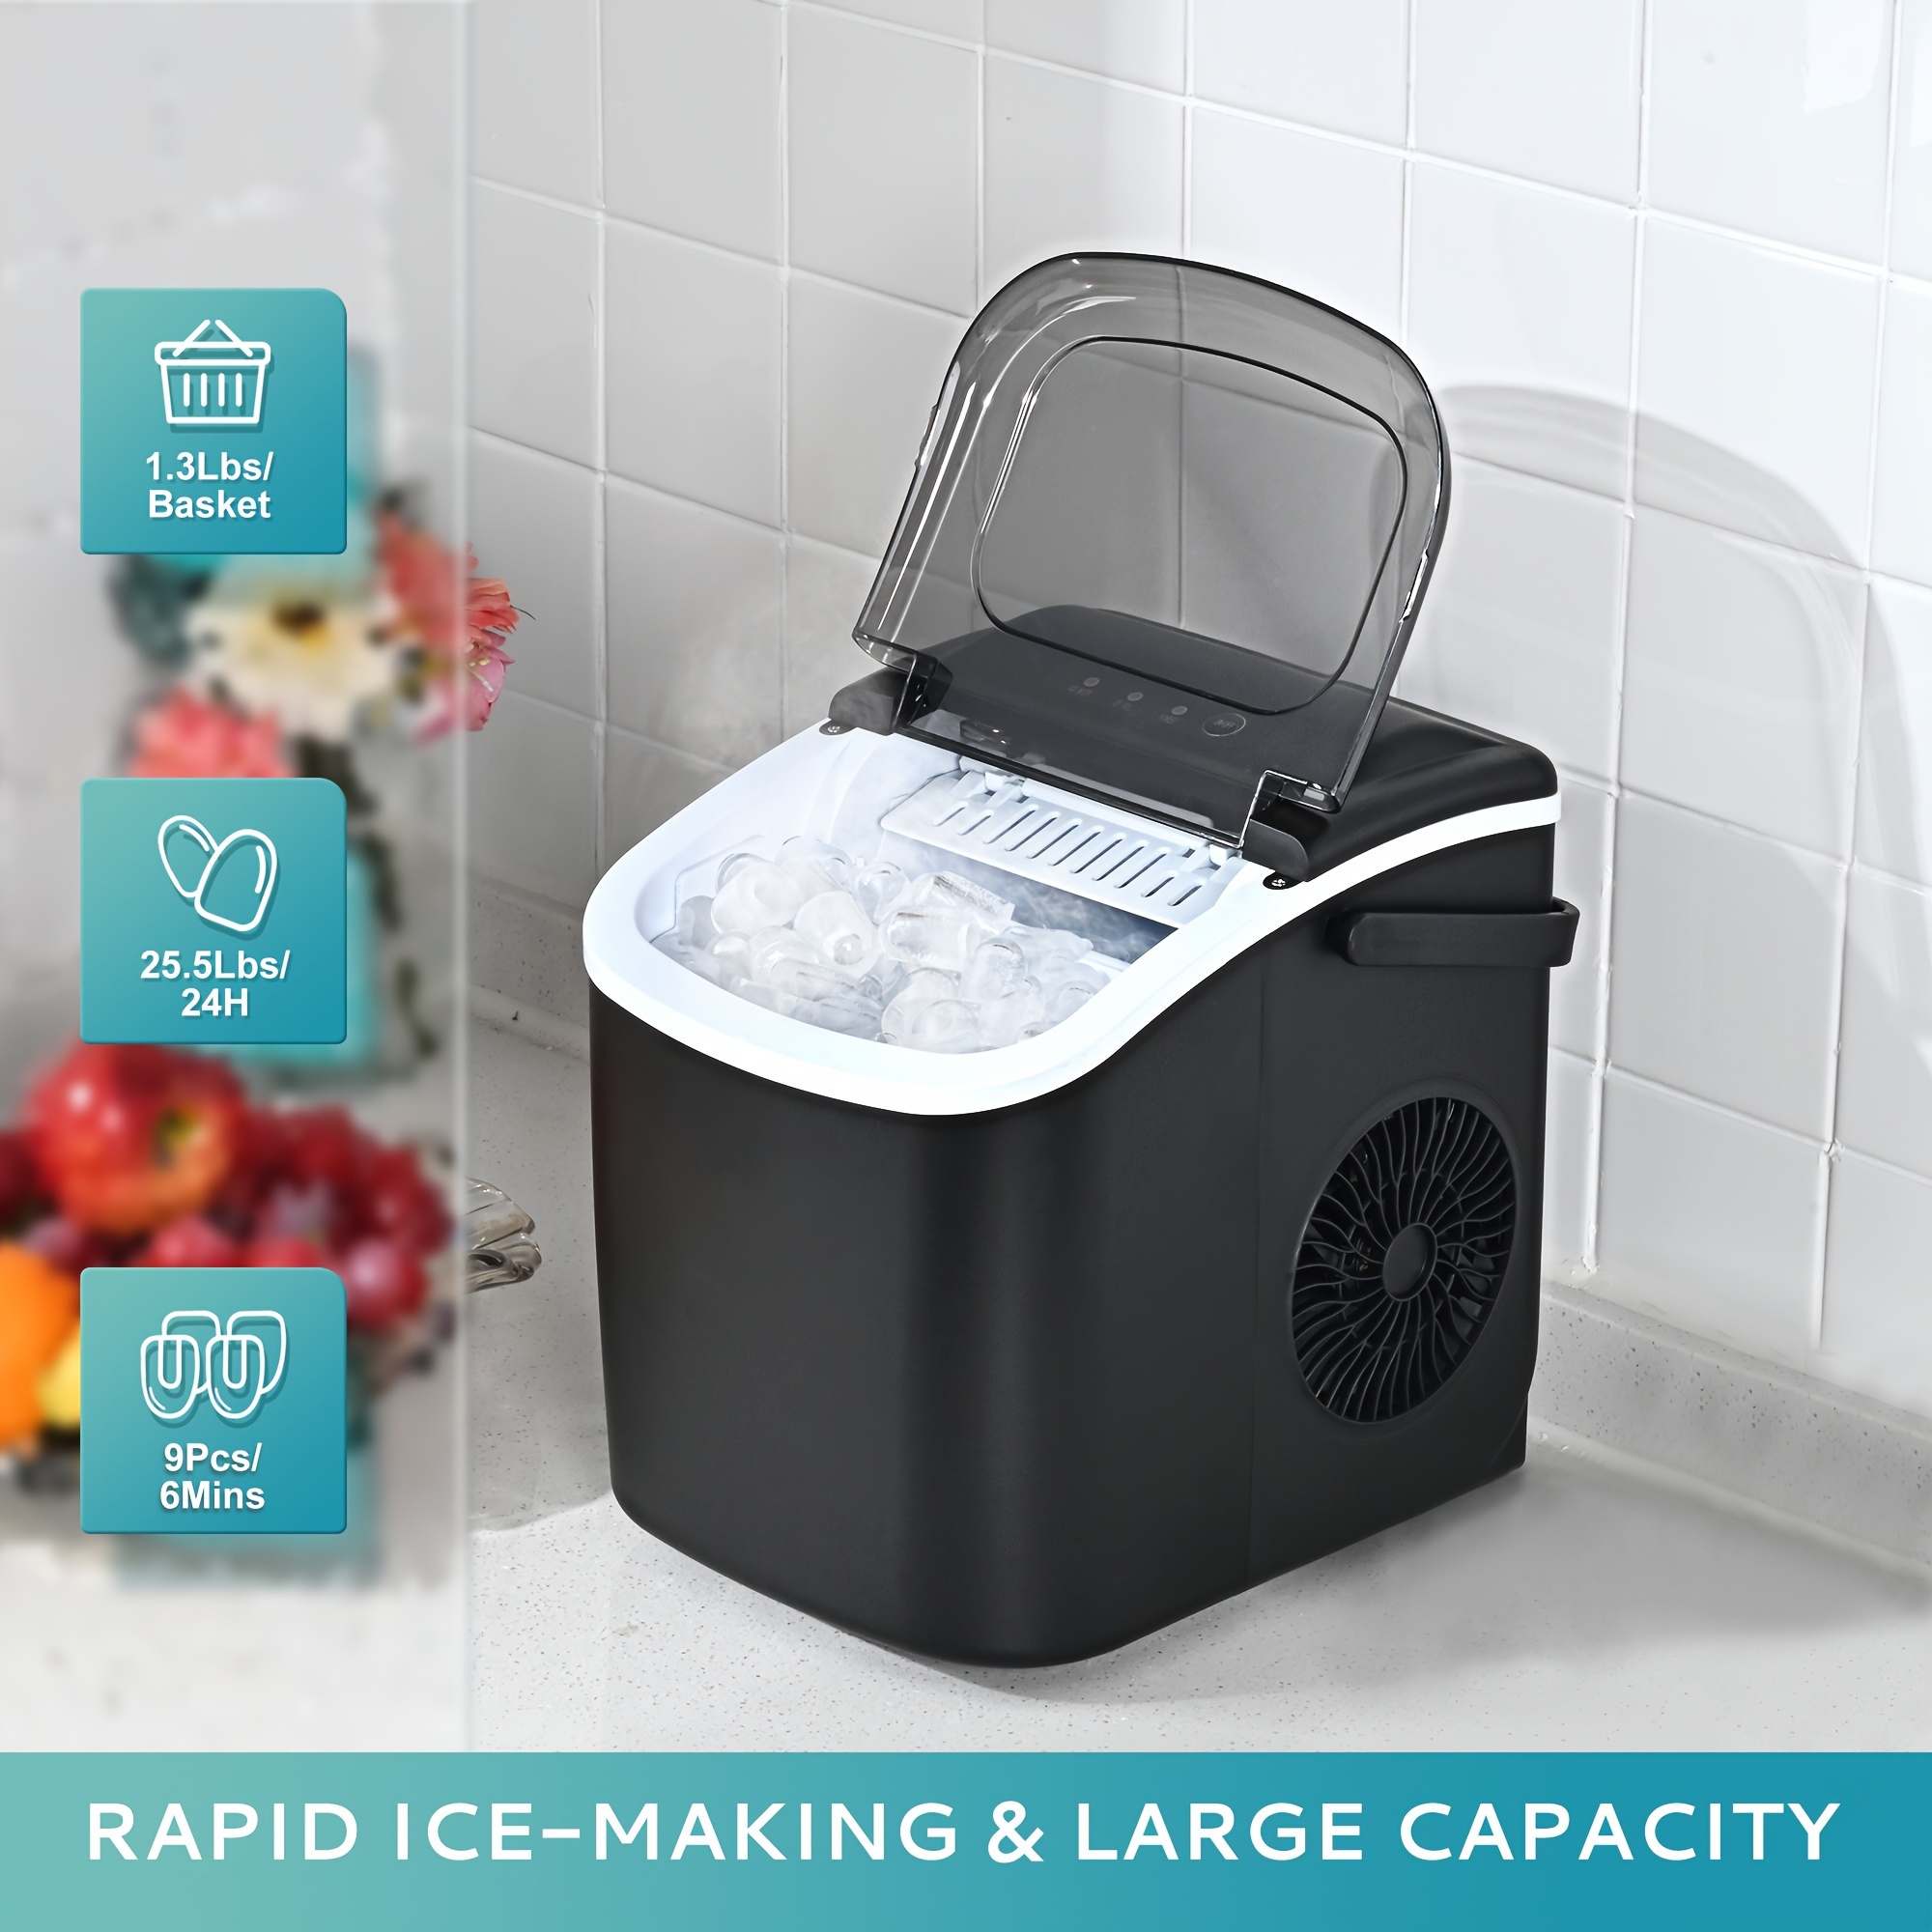 

Ice Maker Countertop, Portable Ice Machine With Self-cleaning, 27lbs/24hrs, 9 Bullet Ice Cubes In 6 Mins, Ice Basket And Scoop, Ideal For Home, Kitchen, Bar, Camping